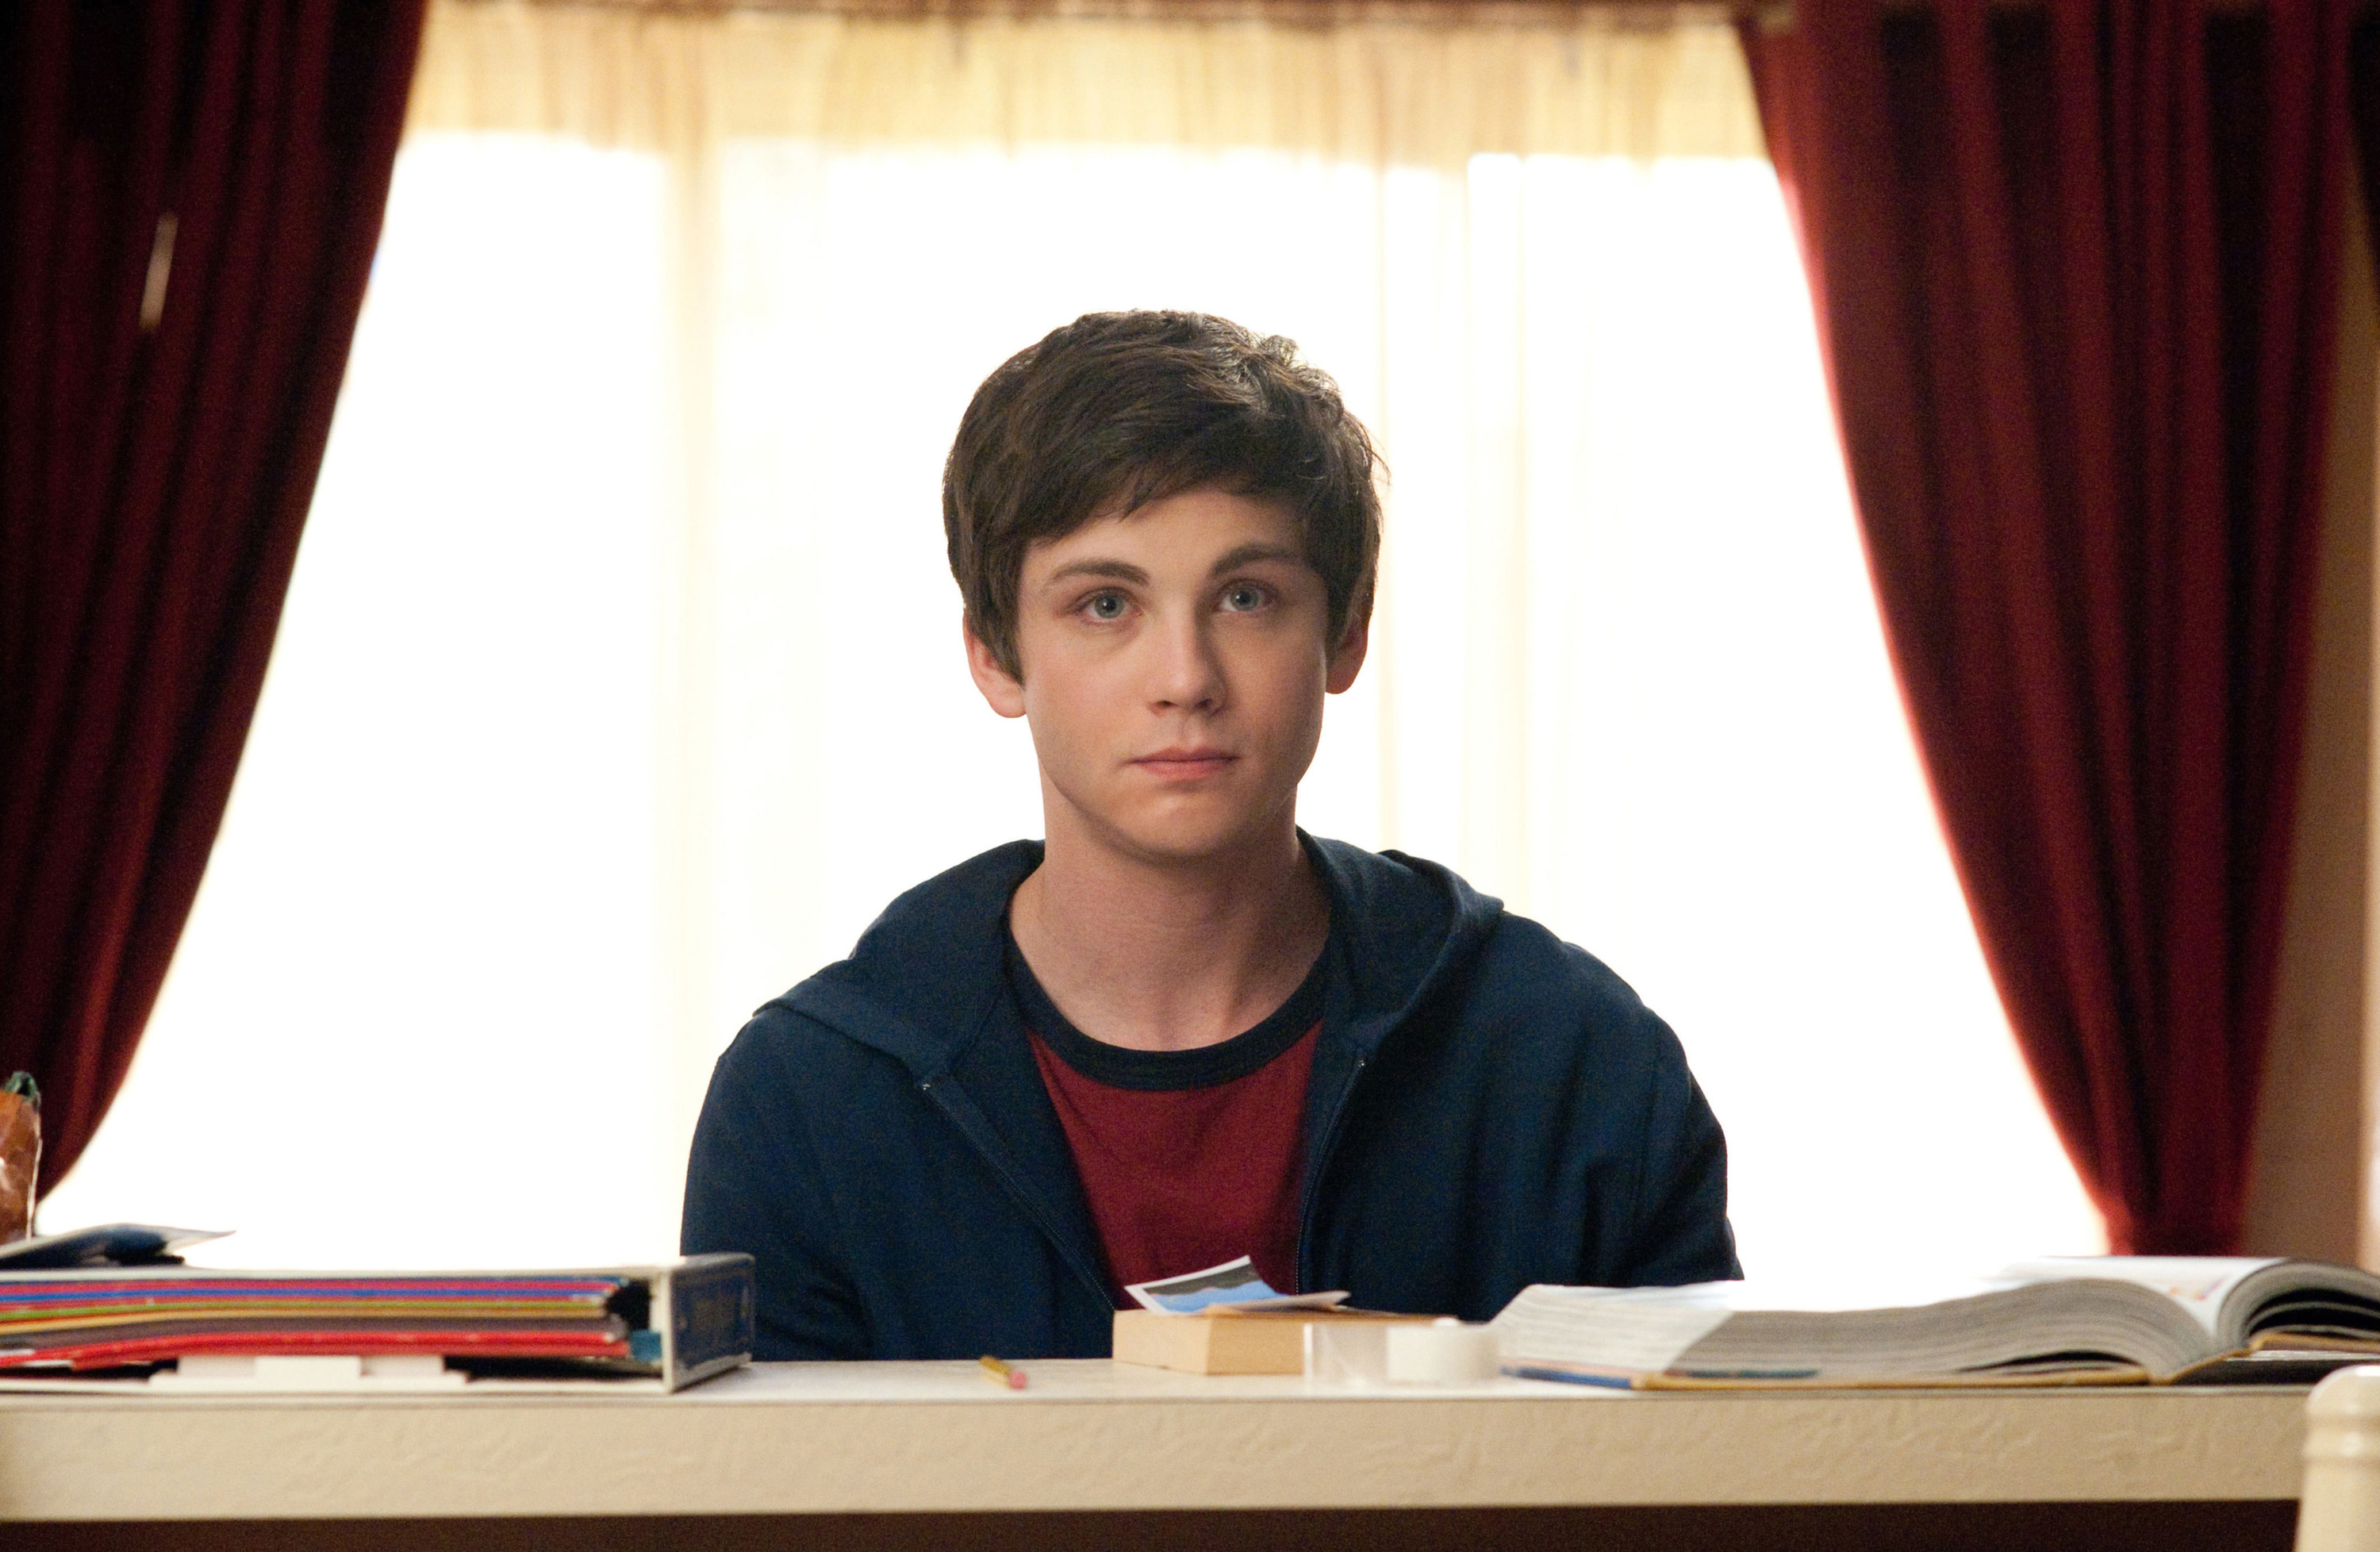 Logan Lerman as Charlie Kelmeckis from The Perks of Being a Wallflower